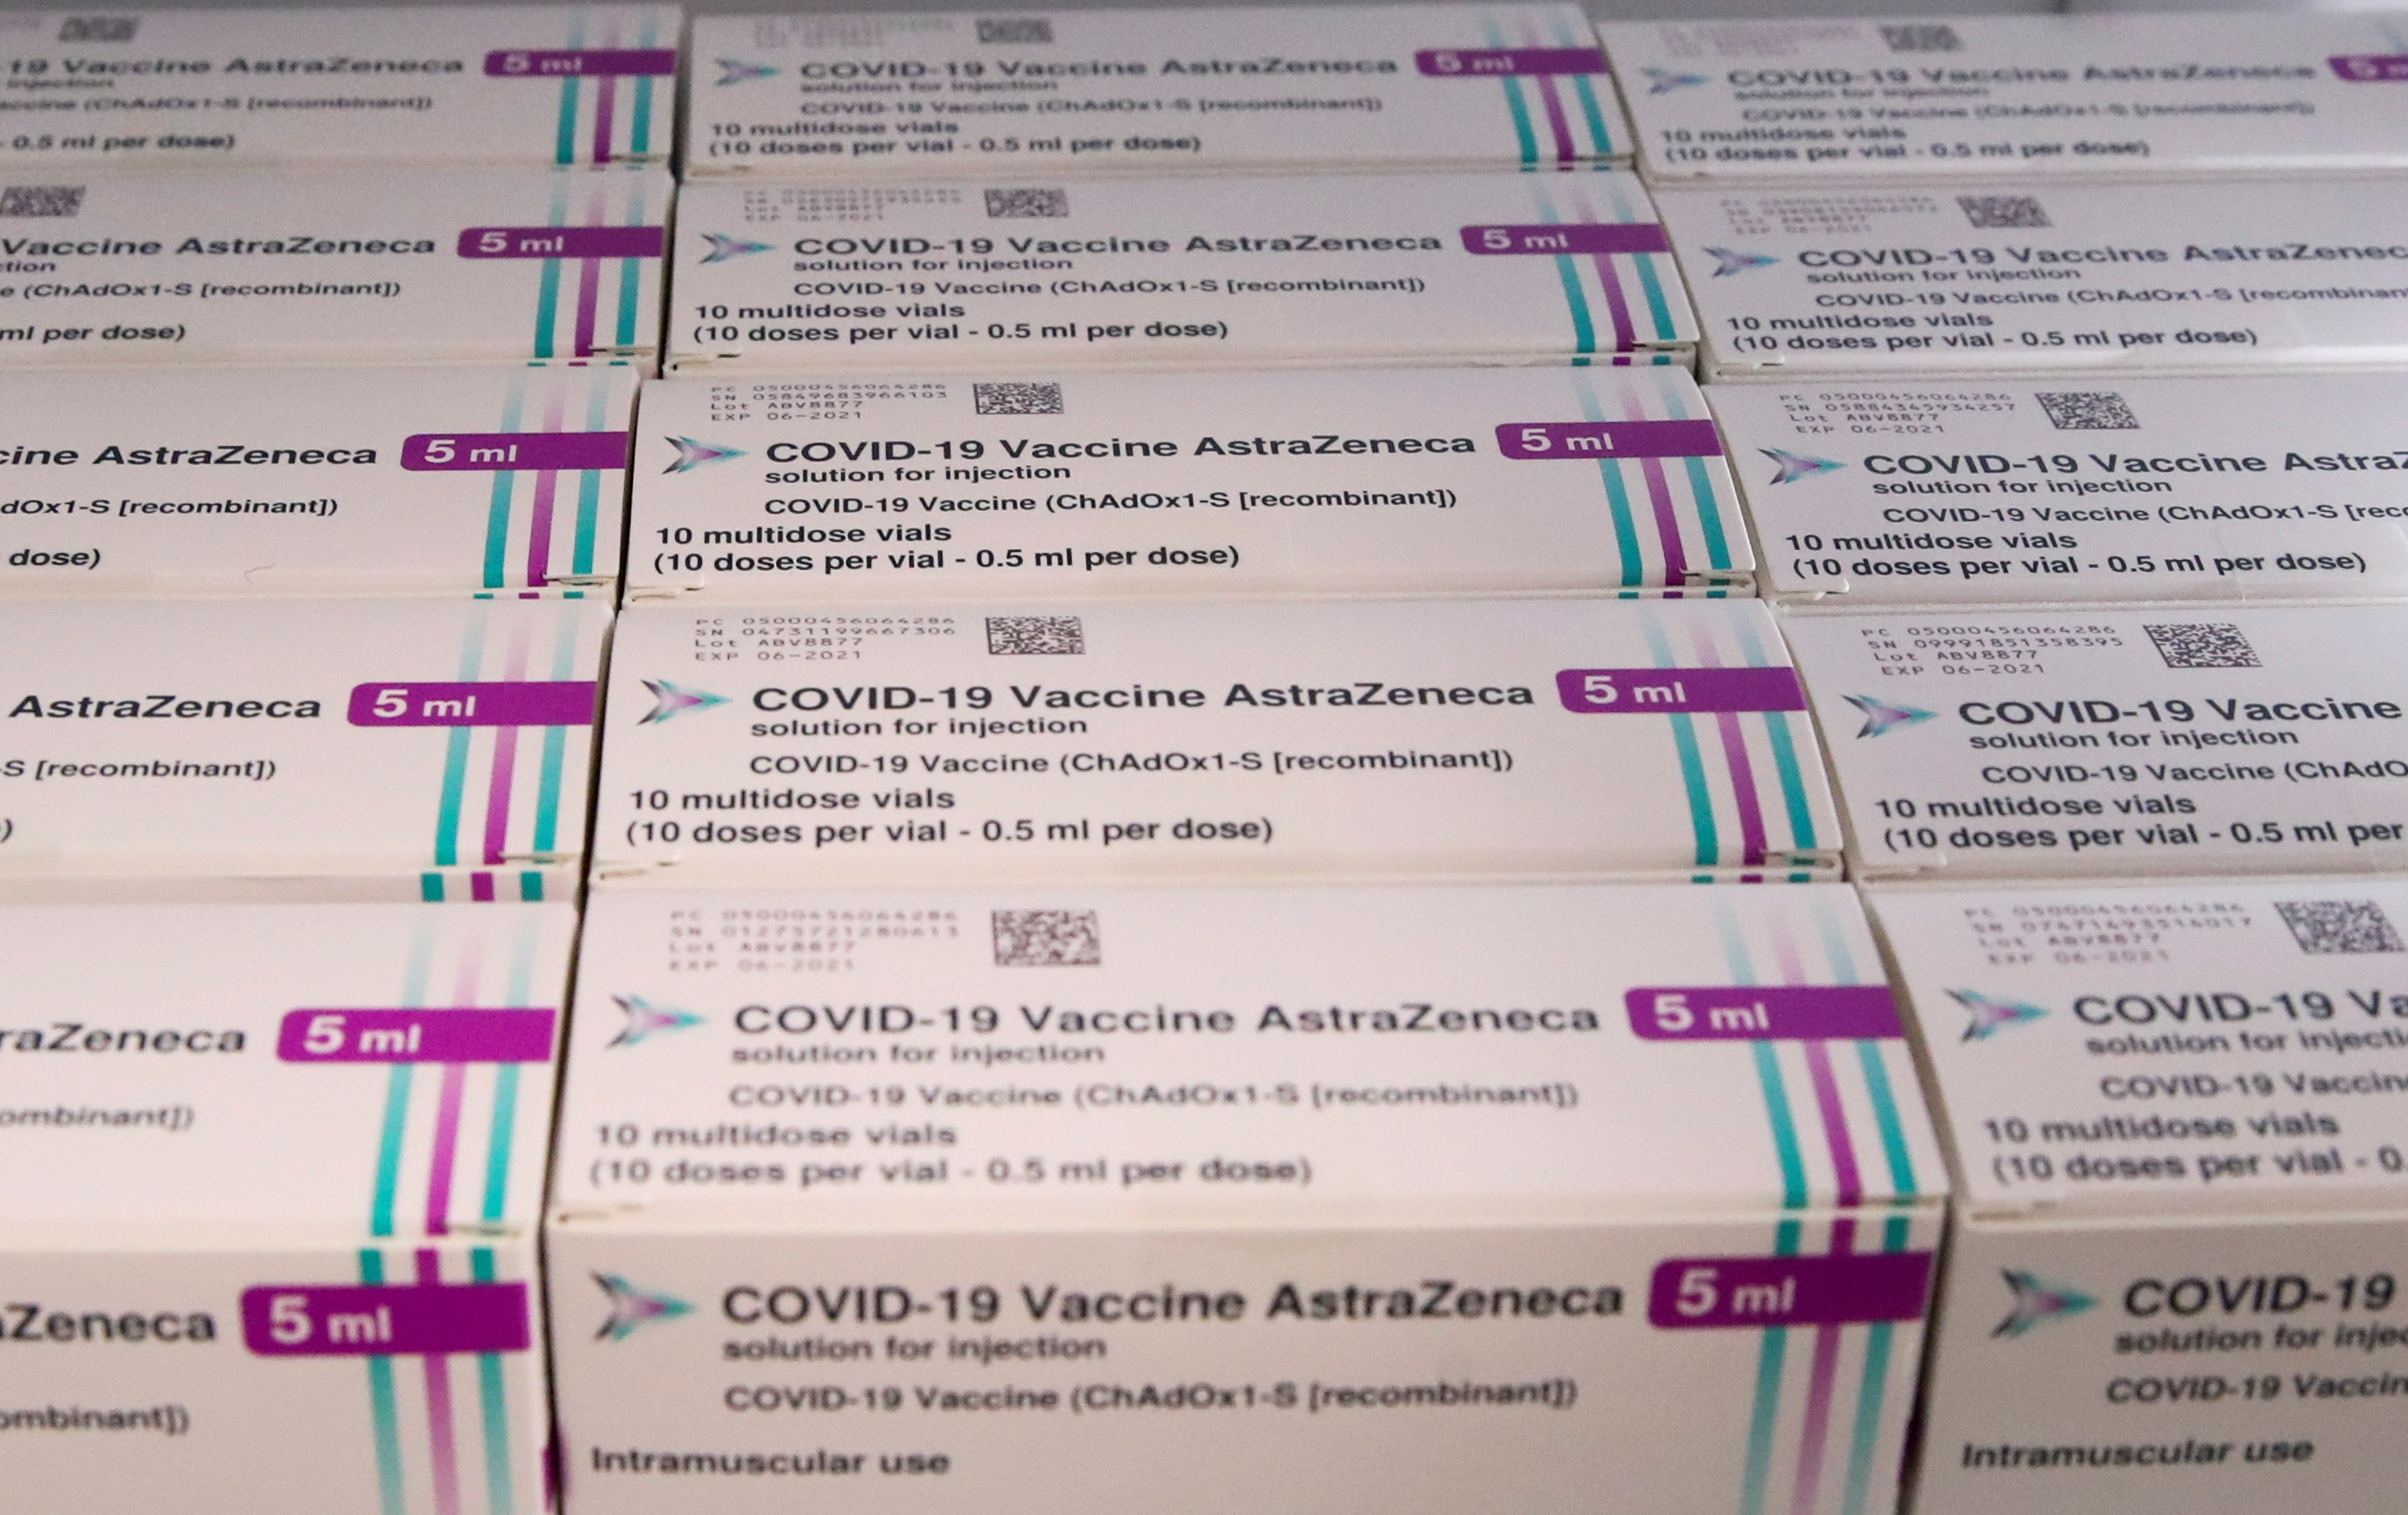 AstraZeneca COVID-19 vaccine is seen at a vaccination center in Ronquieres